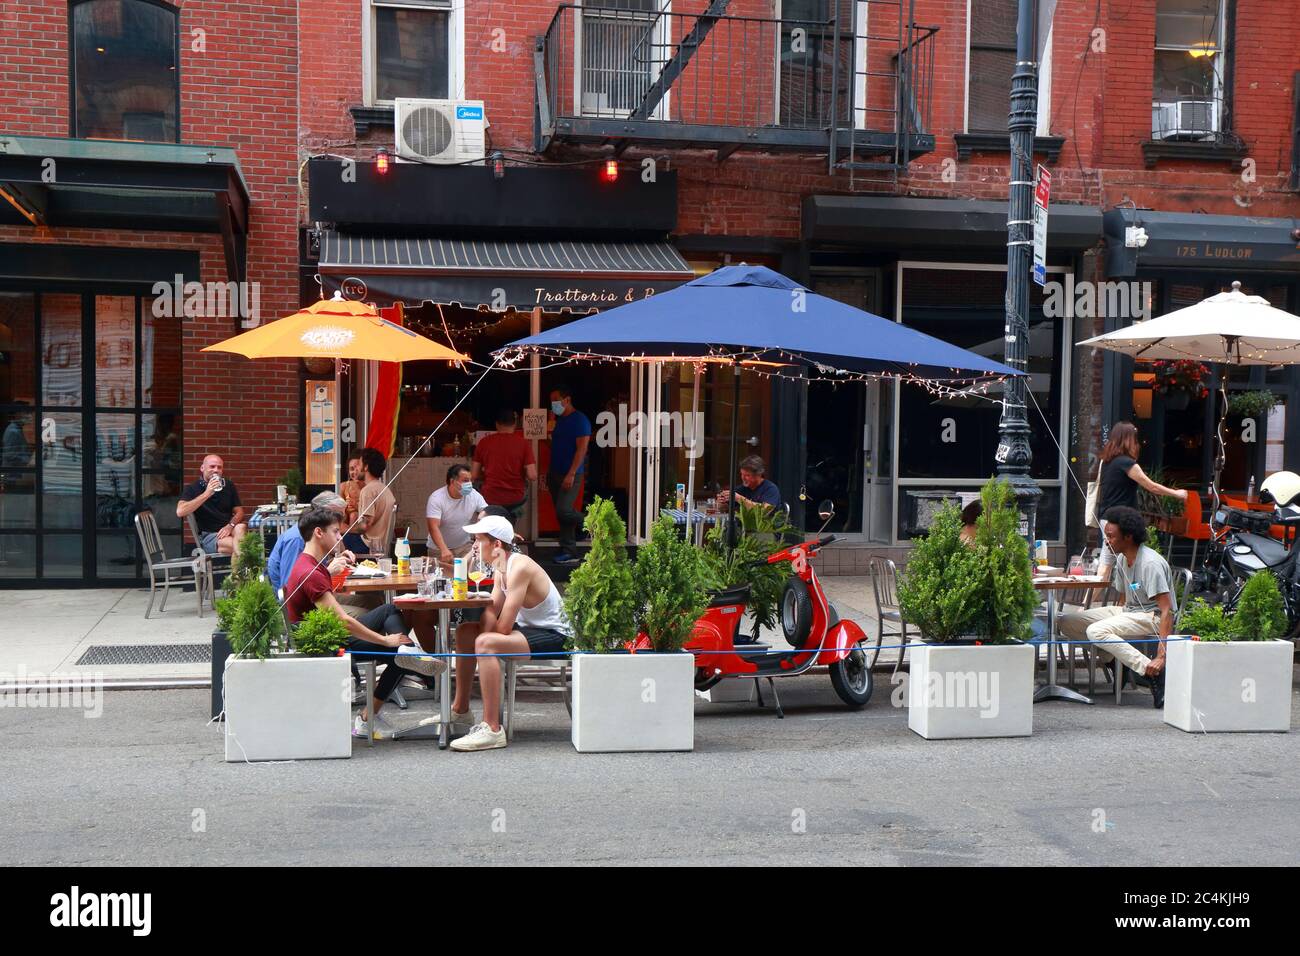 New York, NY. June 25, 2020. Socially distanced outdoor dining at Tre restaurant on Ludlow Street in Manhattan under Phase 2 reopening of New York City. Some restaurants and bars have expanded capacity by converting parking lanes into parklets, sidewalk extensions onto the roadway for dining and leisure, and not for car storage. Stock Photo